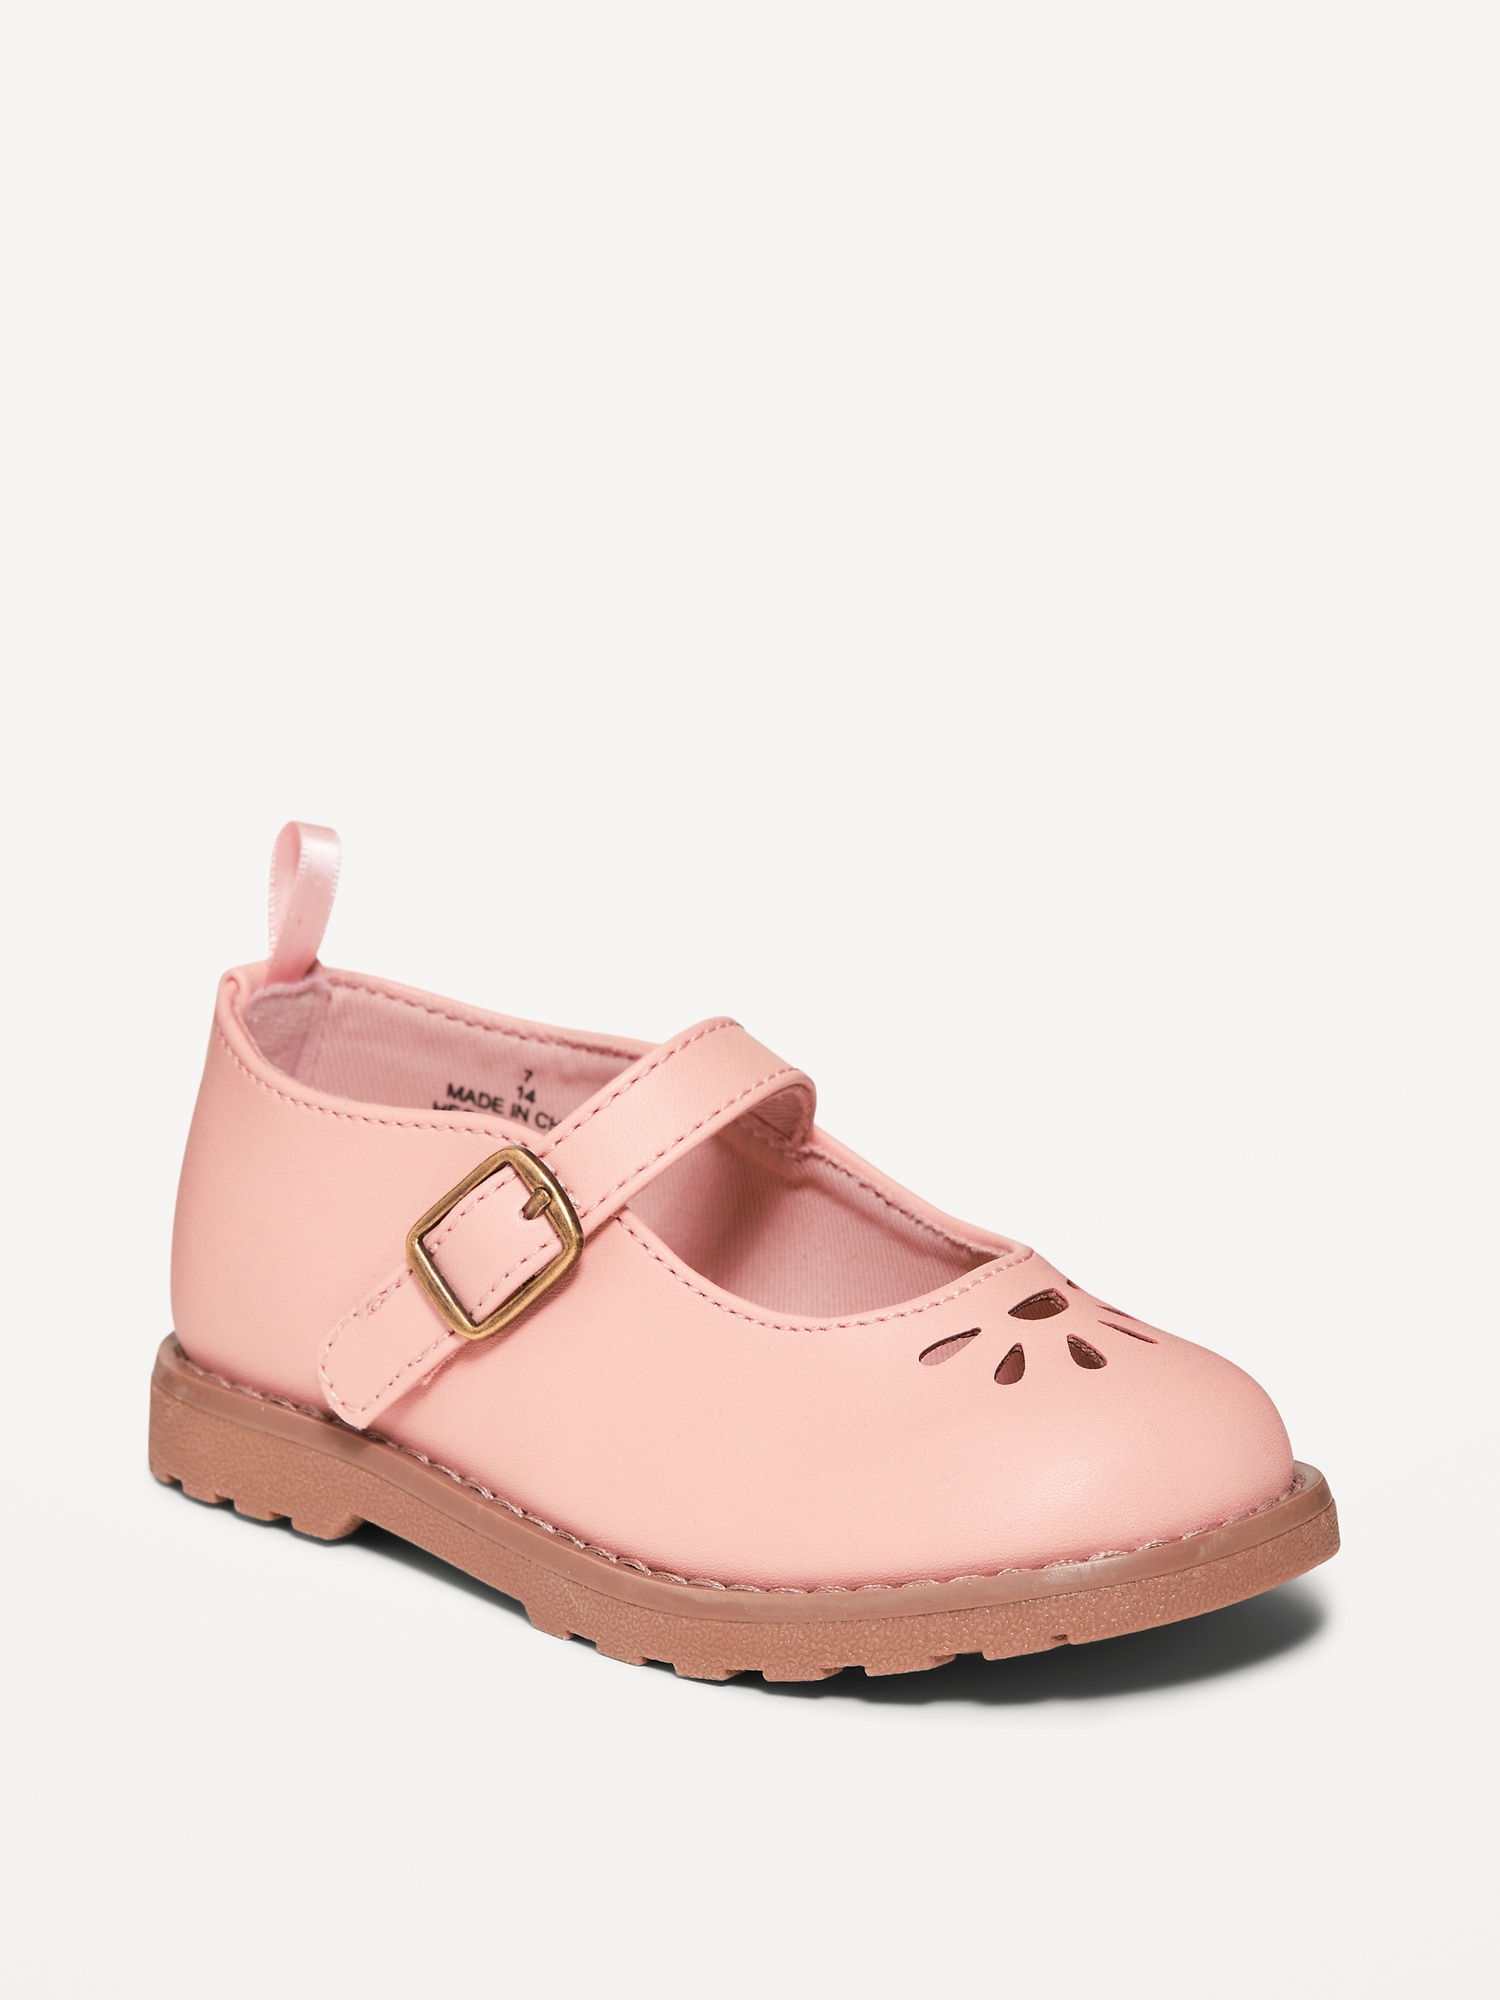 Faux-Leather Mary-Jane Shoes for Toddler Girls